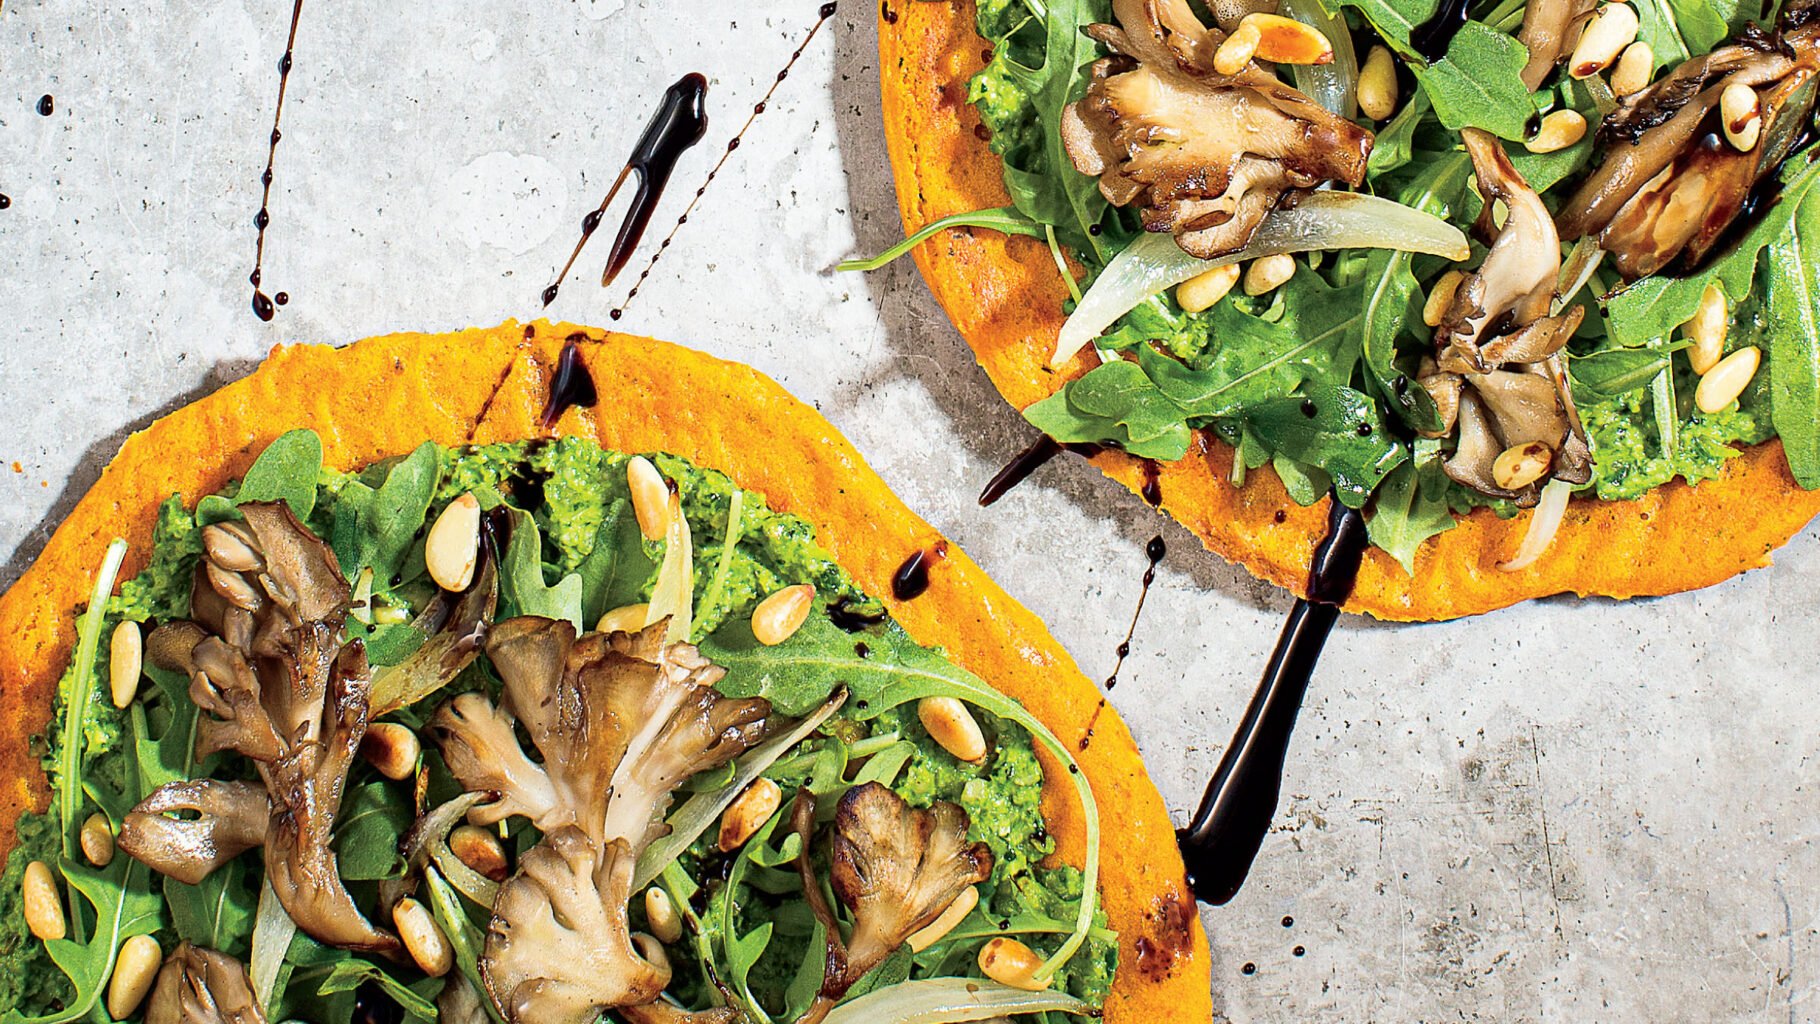 Sweet Potato Pizza with Maitakes recipe Excerpted from Nourish: Plant-Based Recipes To Feed Body Mind And Soul by Terry Walters